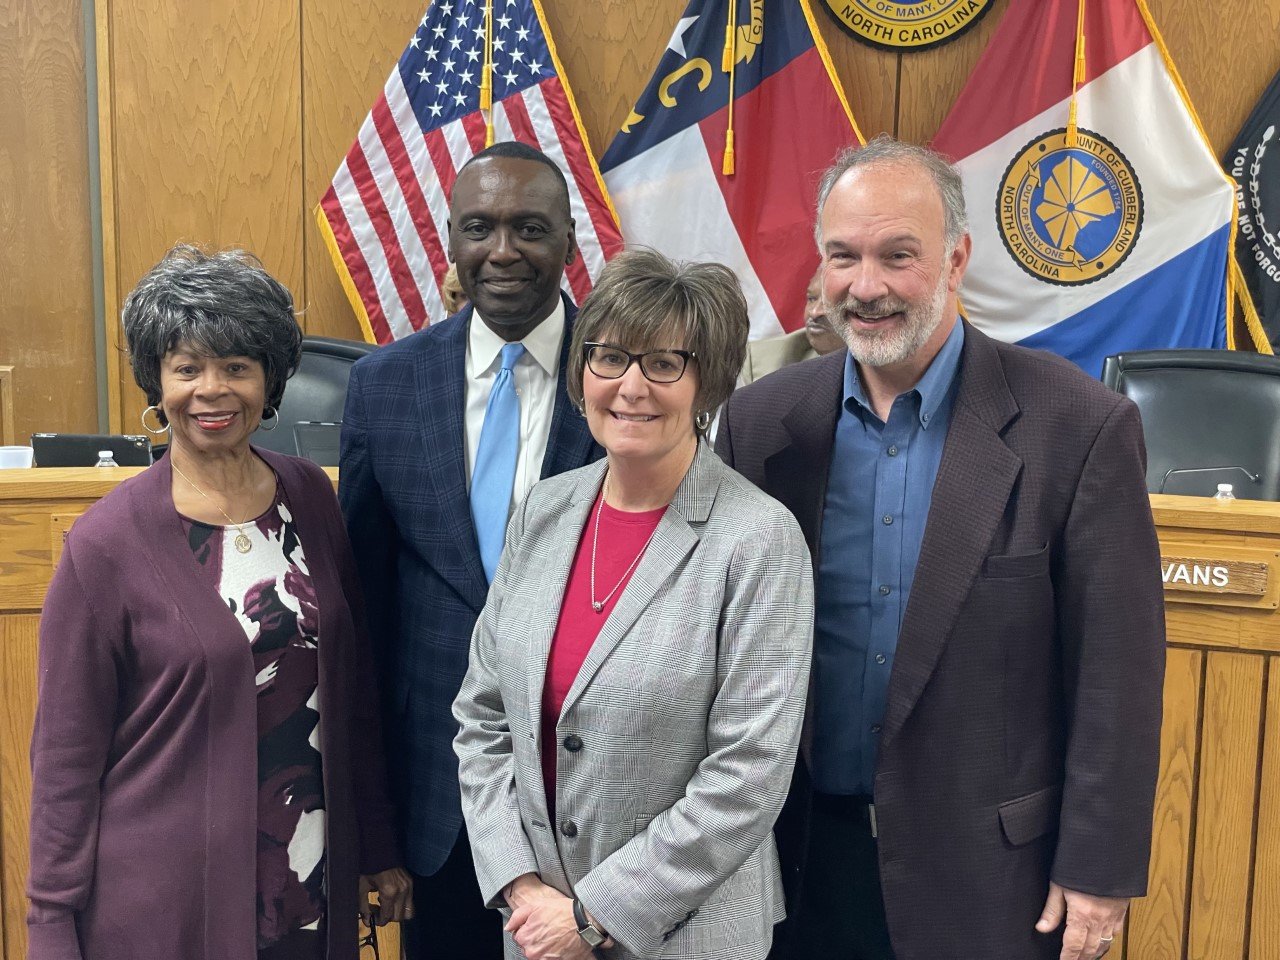 The Cumberland County Board of Commissioners honored County Manager Amy Cannon, who is retiring in December, for her service to the county. Commissioners Jeannette Council, Charles Evans and Jimmy Keefe made the presentation because they were on the board when Cannon was hired as manager.